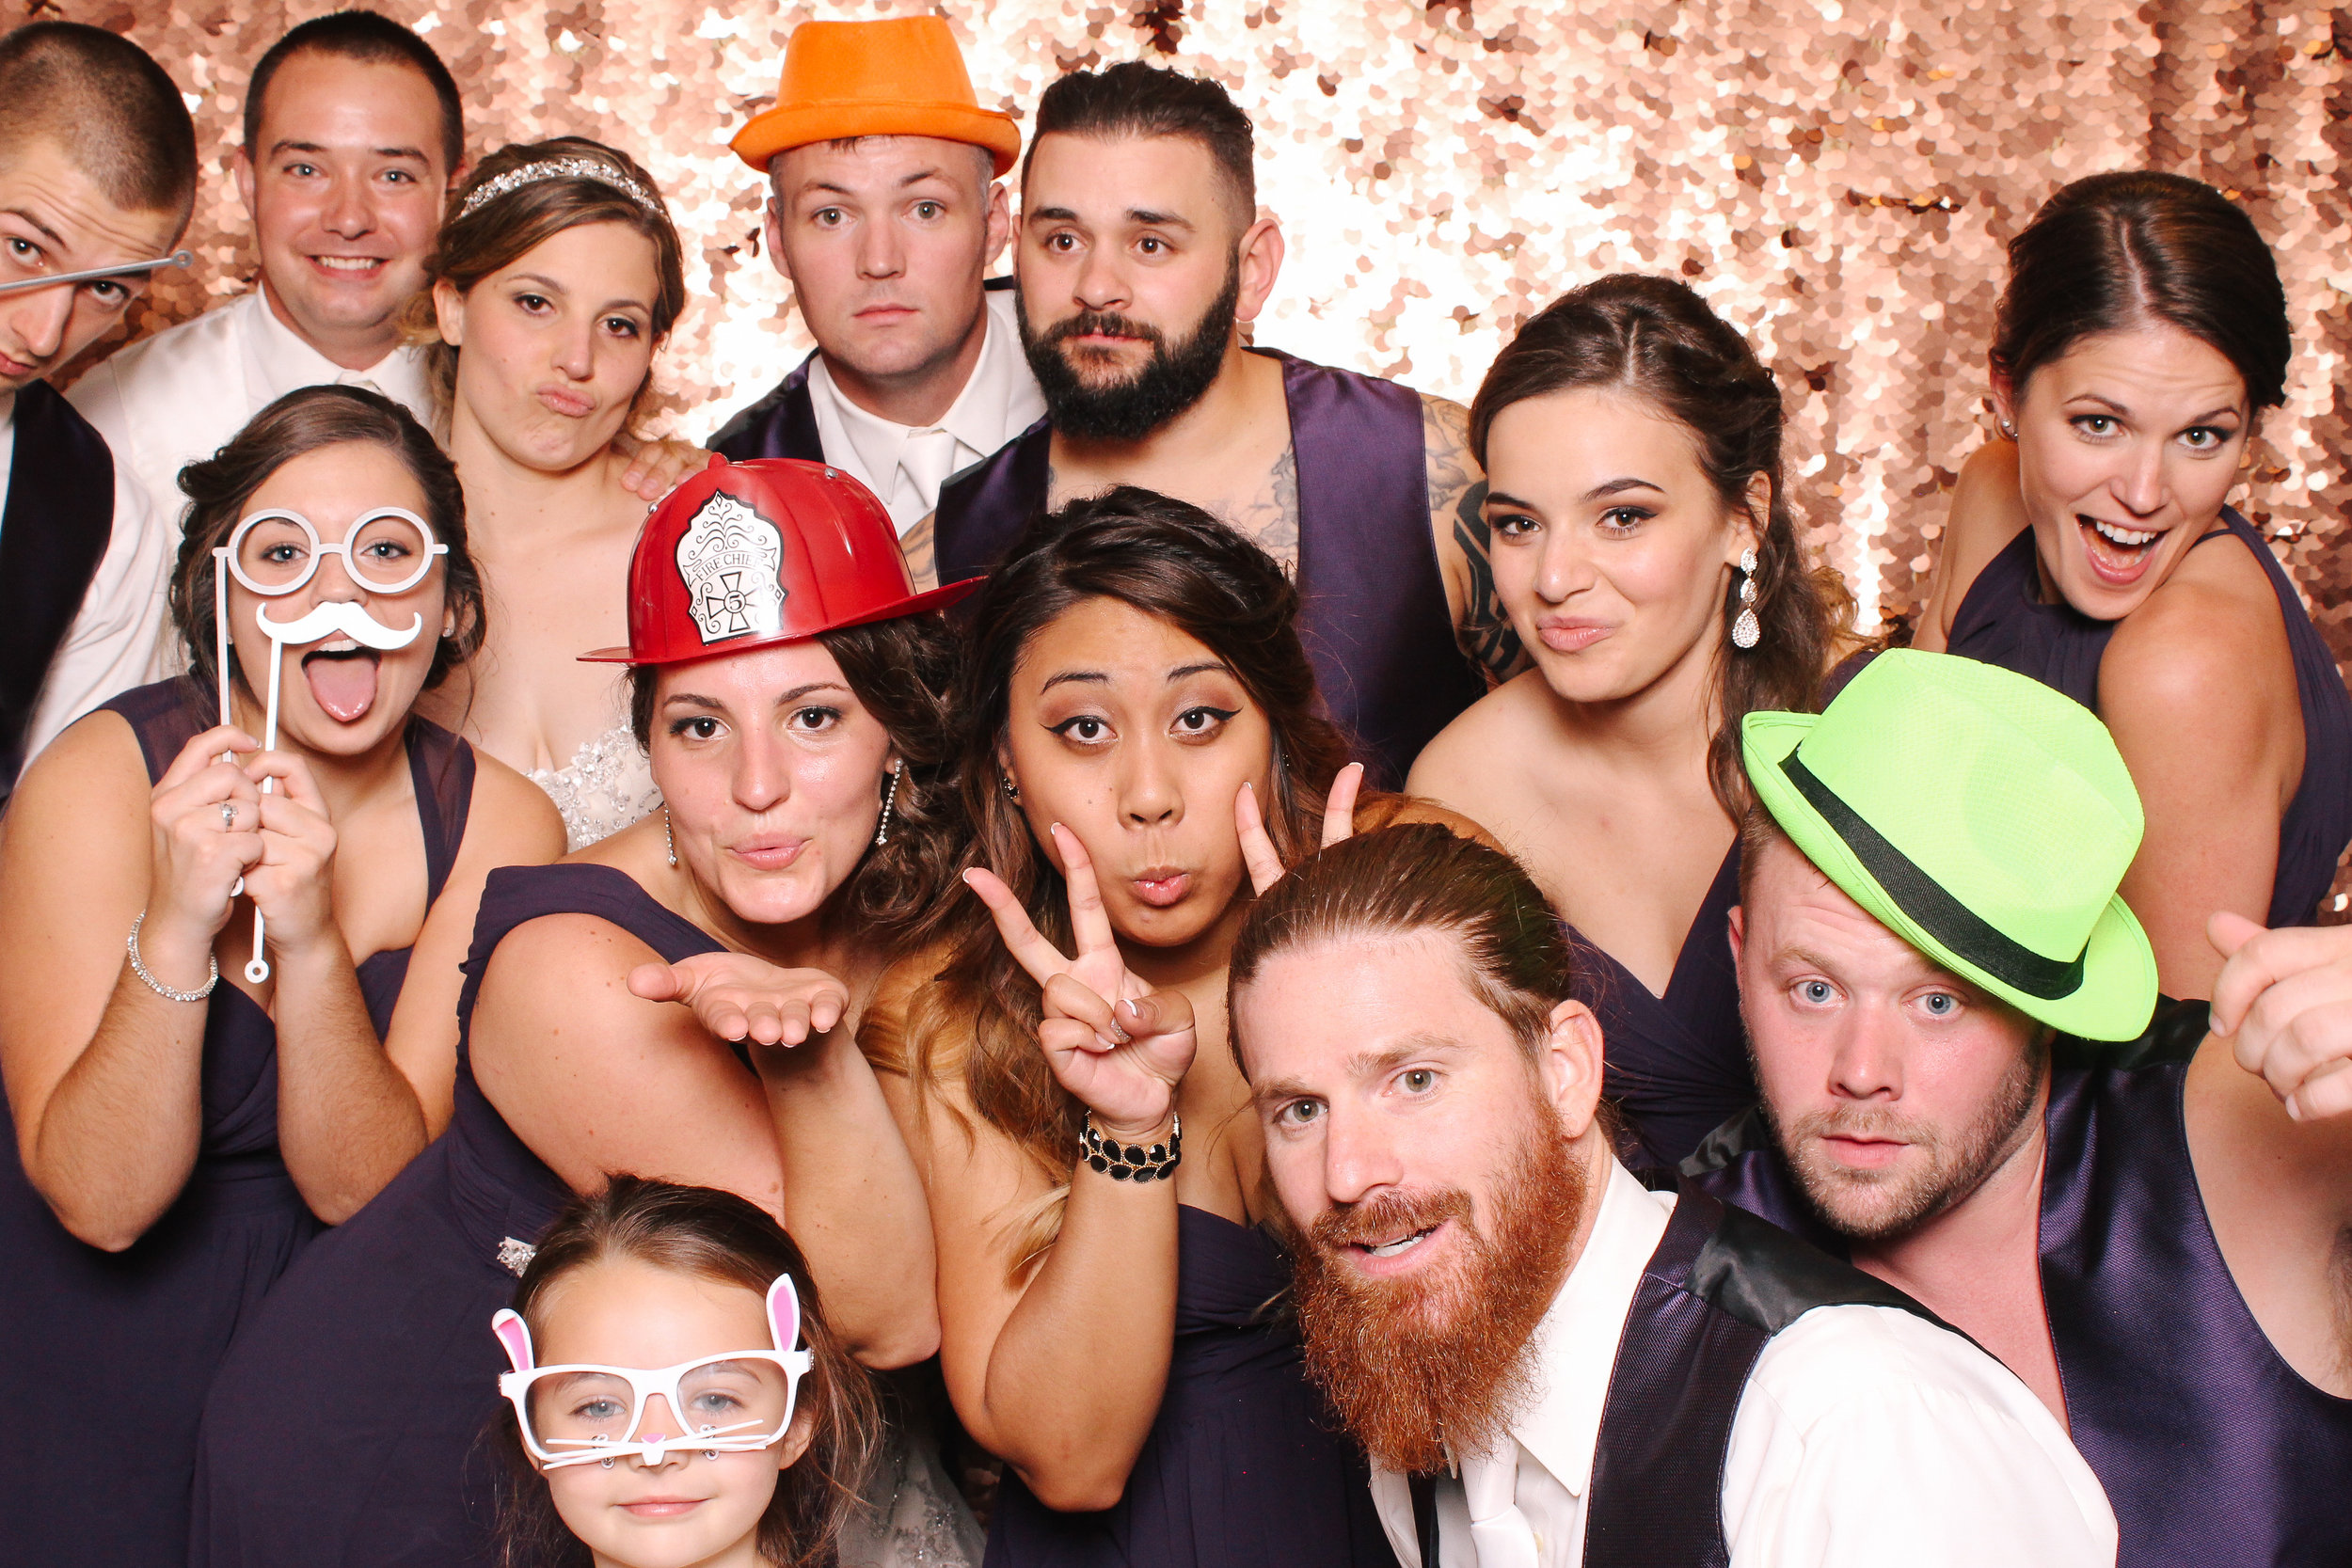 00262-metropolitan at the 9 photobooth too much awesomeness Cleveland Photobooth Company-20160924.jpg